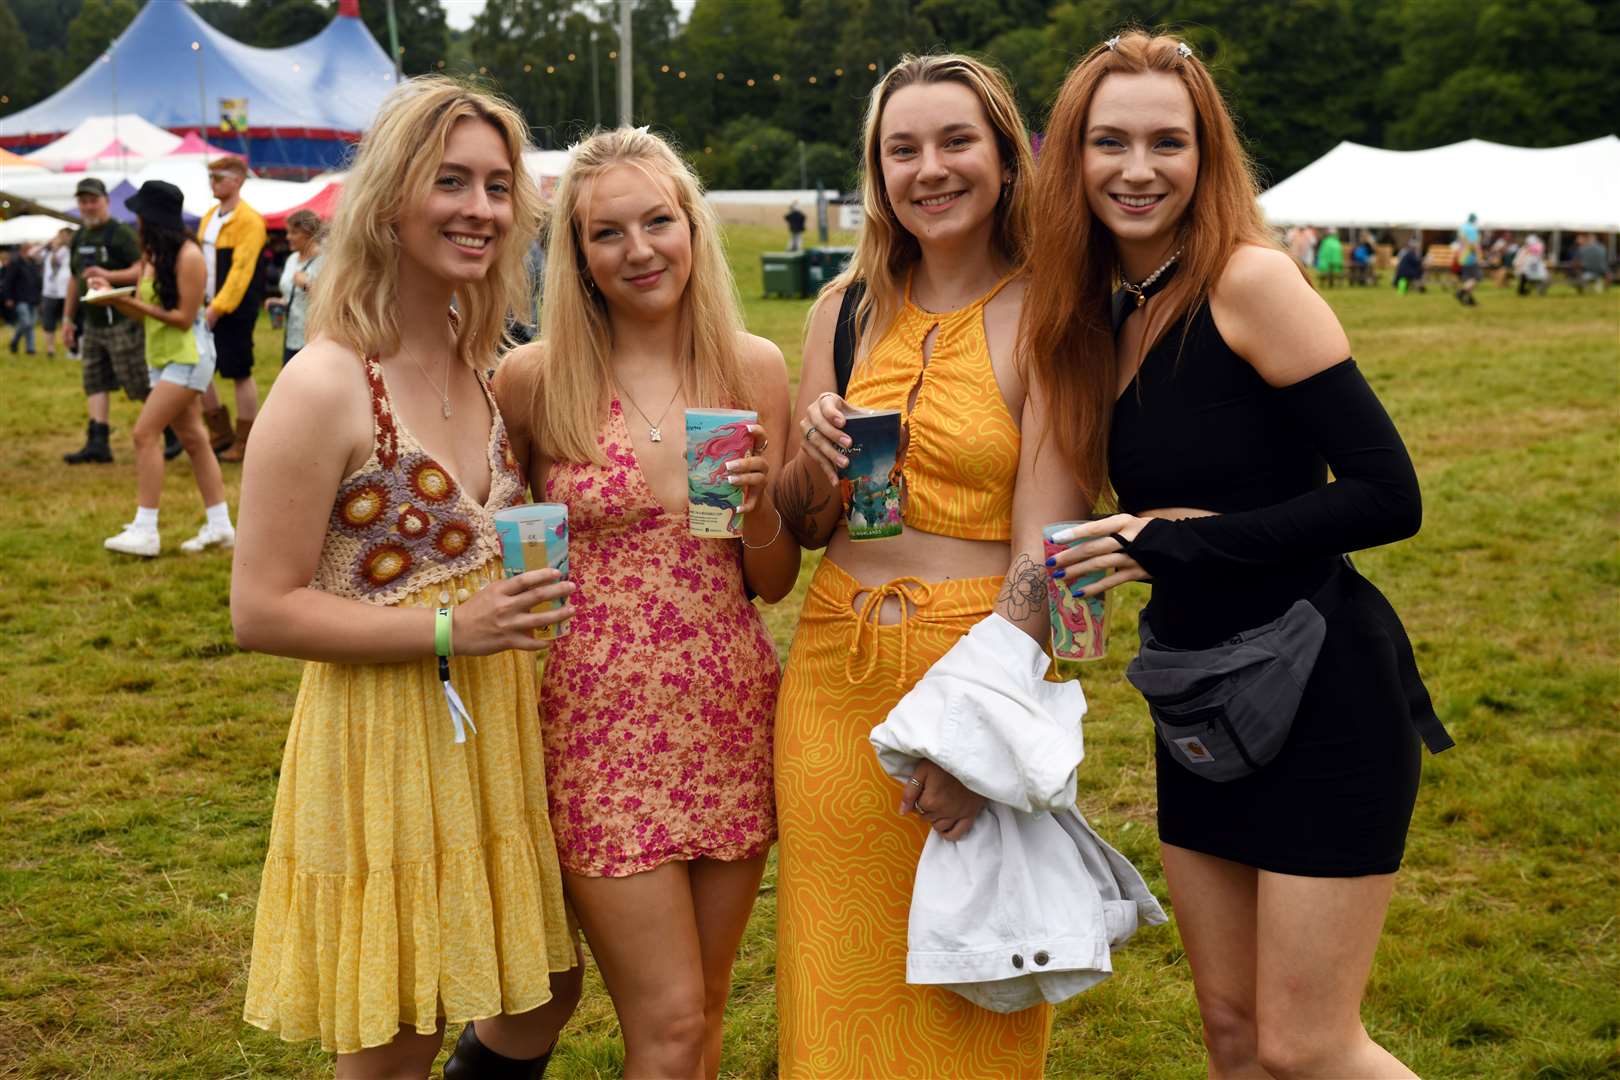 Sara Anderson, Niamh Peters, Phoebe Somervail and Orla Peters are amongst those who have arrived at the Belladrum site. Many others have been stuck in traffic. Picture: James Mackenzie.